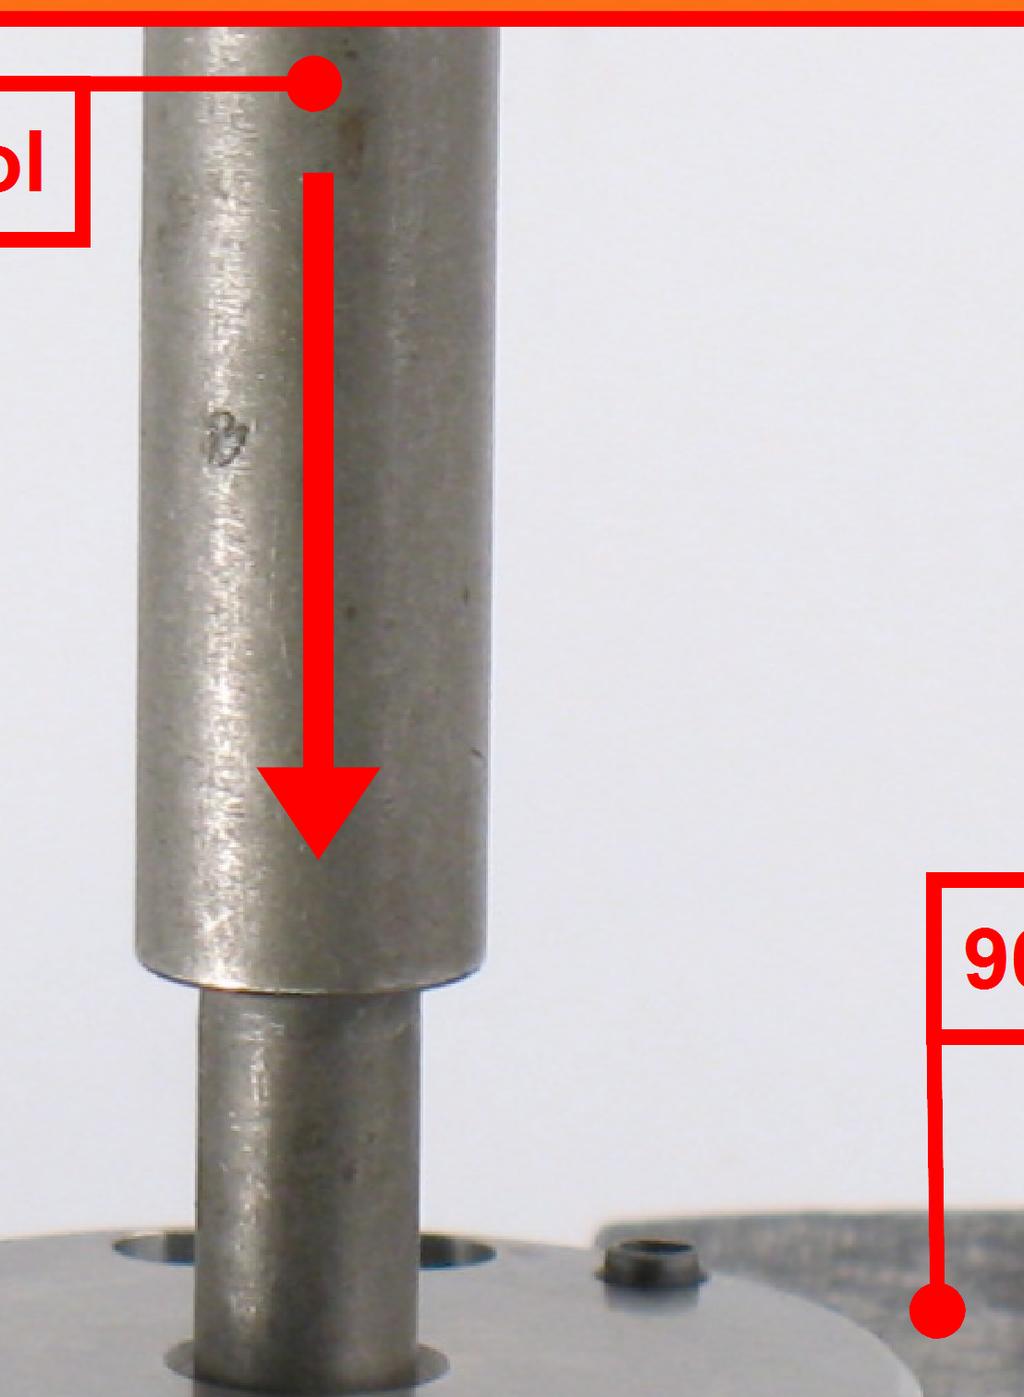 Use the 96211 Bearing Removal Tool and